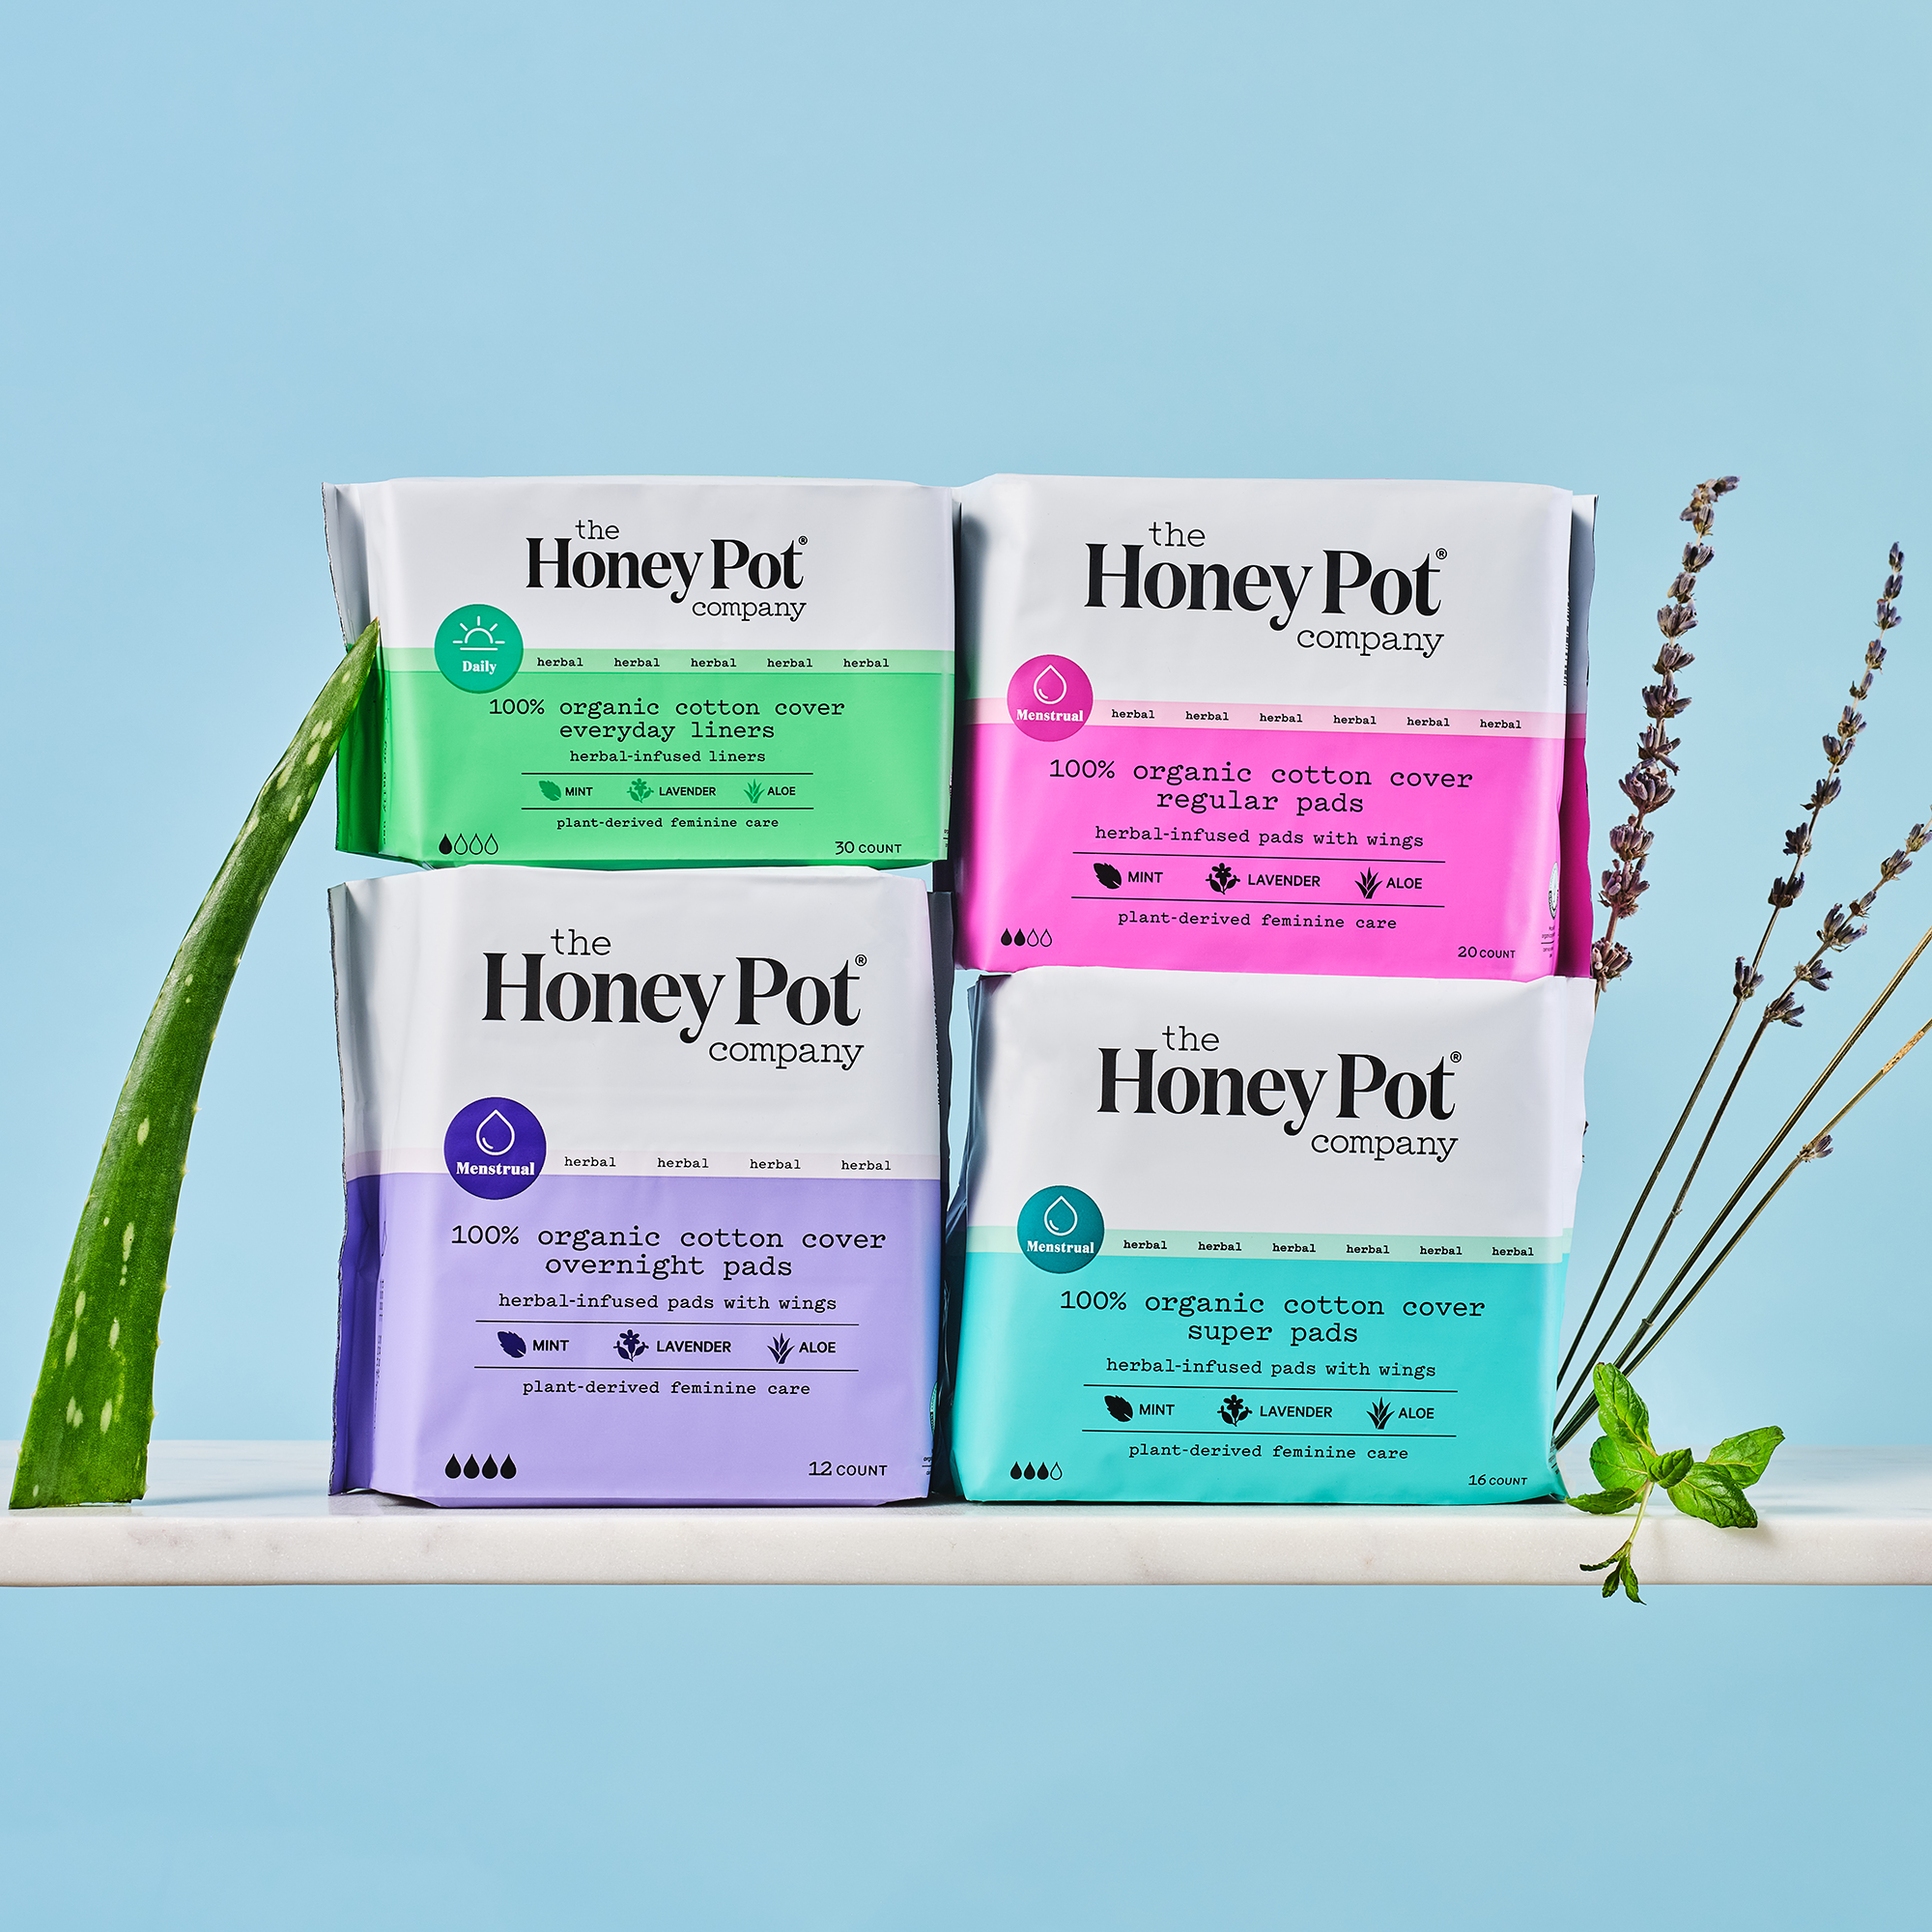 The Honey Pot Company, Herbal Overnight Pads with Wings, Organic Cotton Cover, 12 ct. - image 2 of 9